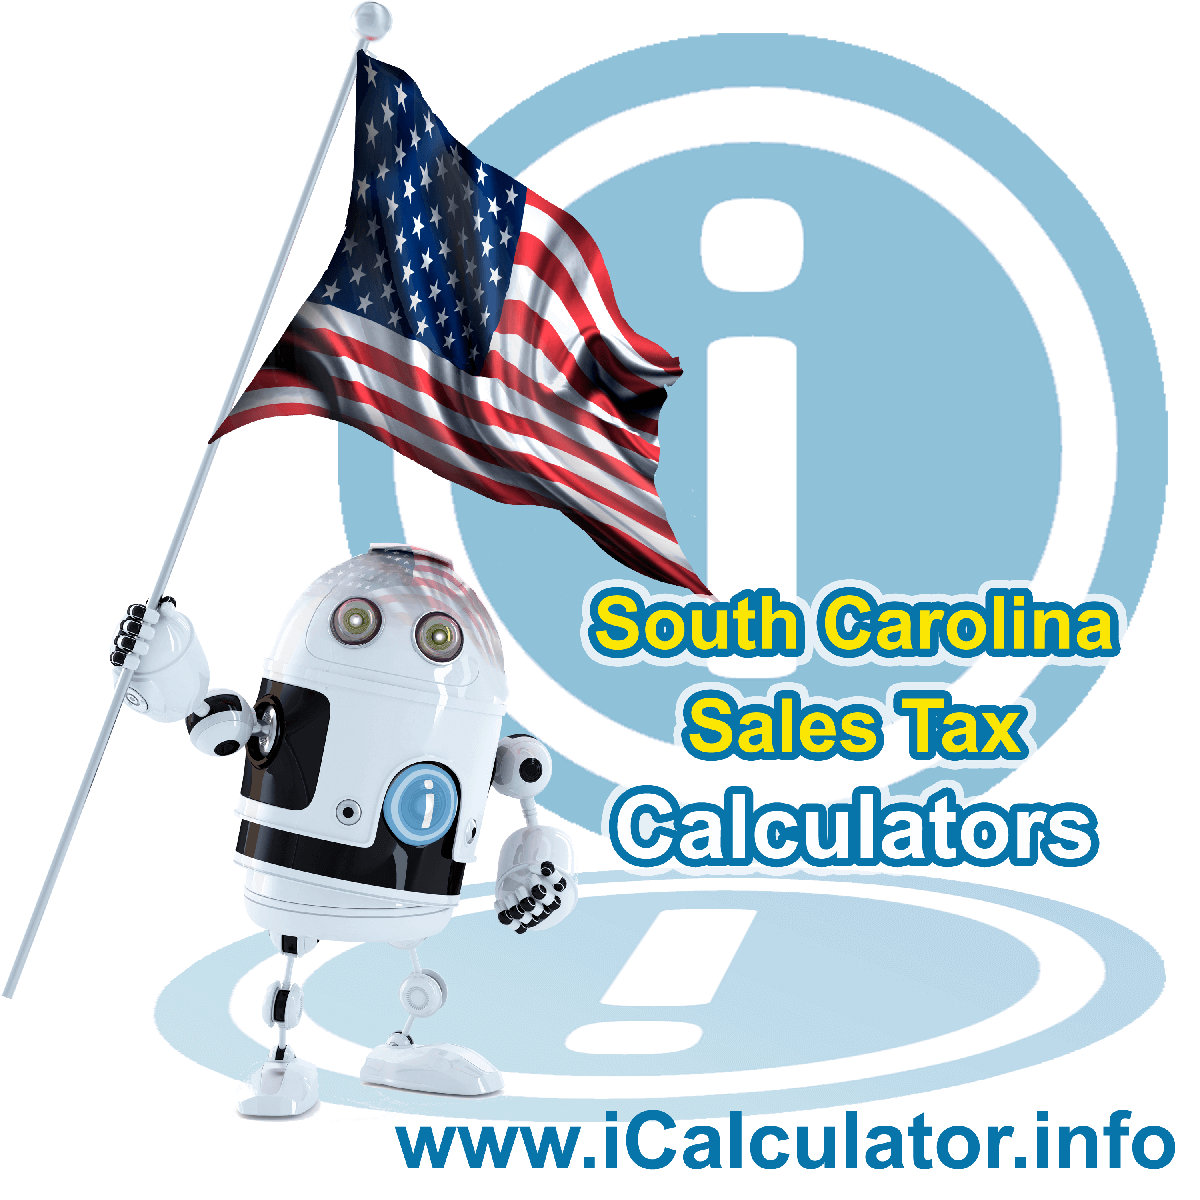 Allendale Sales Rates: This image illustrates a calculator robot calculating Allendale sales tax manually using the Allendale Sales Tax Formula. You can use this information to calculate Allendale Sales Tax manually or use the Allendale Sales Tax Calculator to calculate sales tax online.